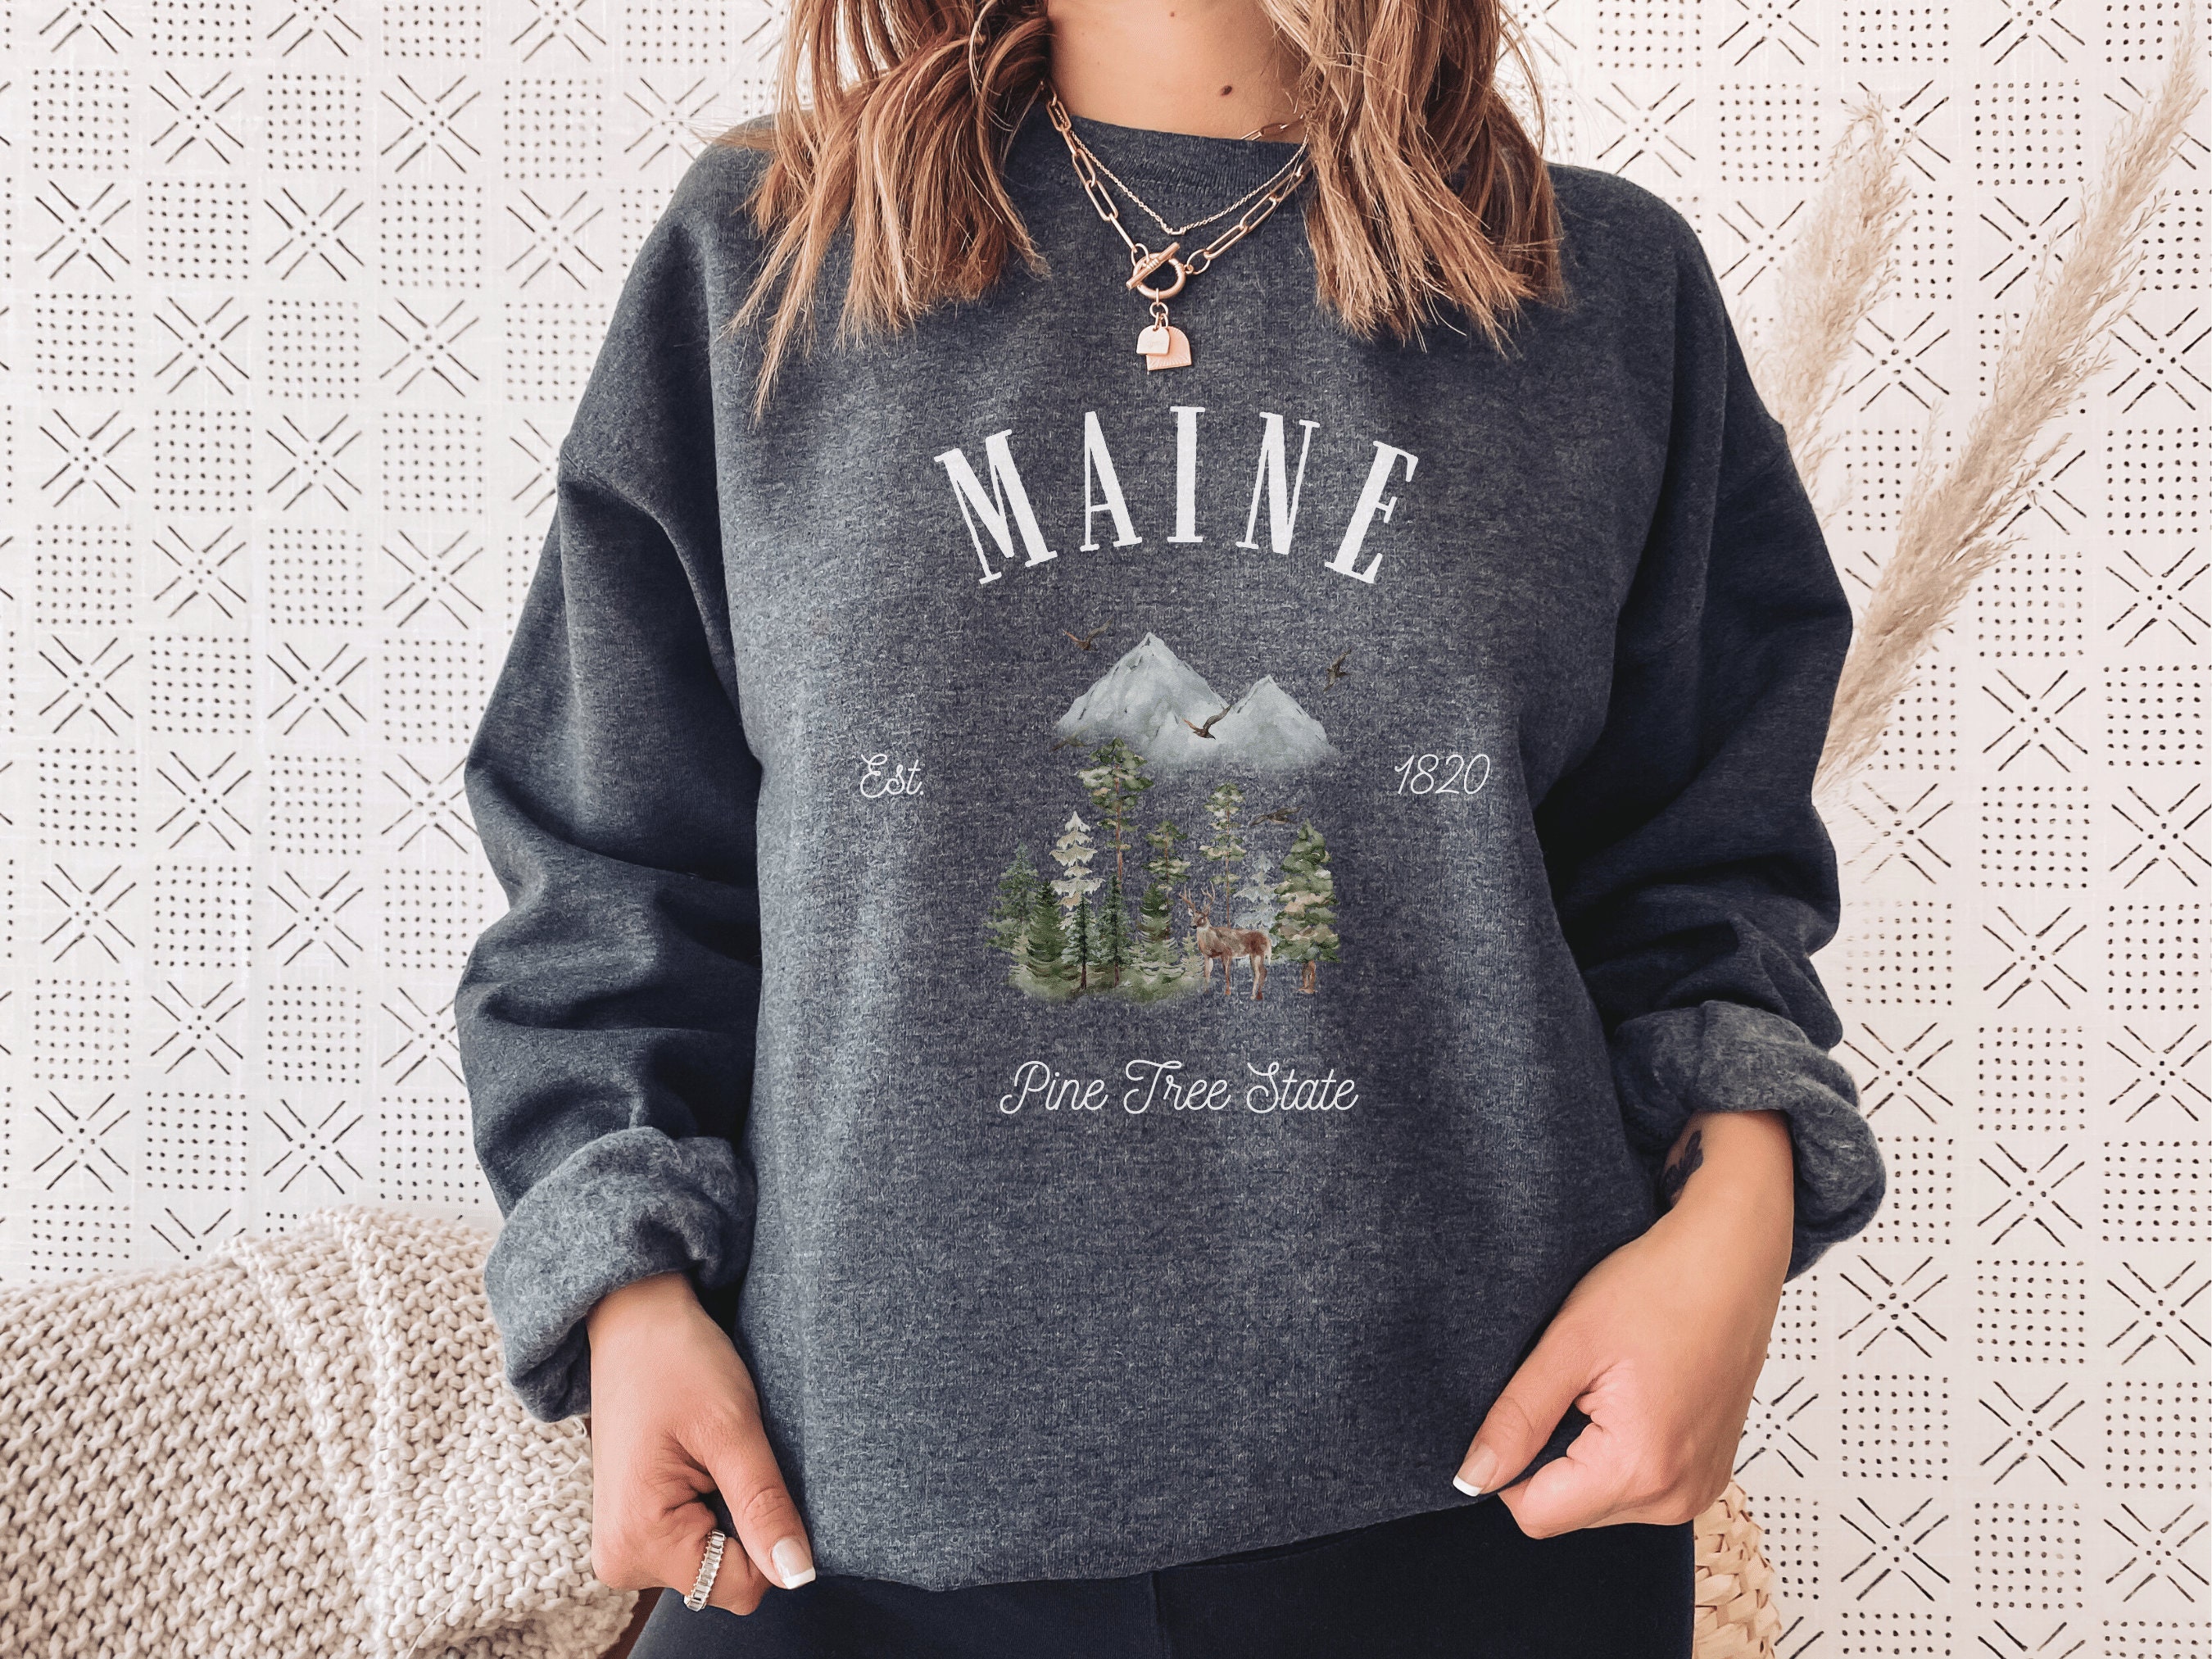 Discover Maine Sweatshirt, Pine Tree State, New England Shirt, Womens Sweater, Vintage Pullover Mountain Crewneck Portland Apparel Hoodie Unisex Gifts